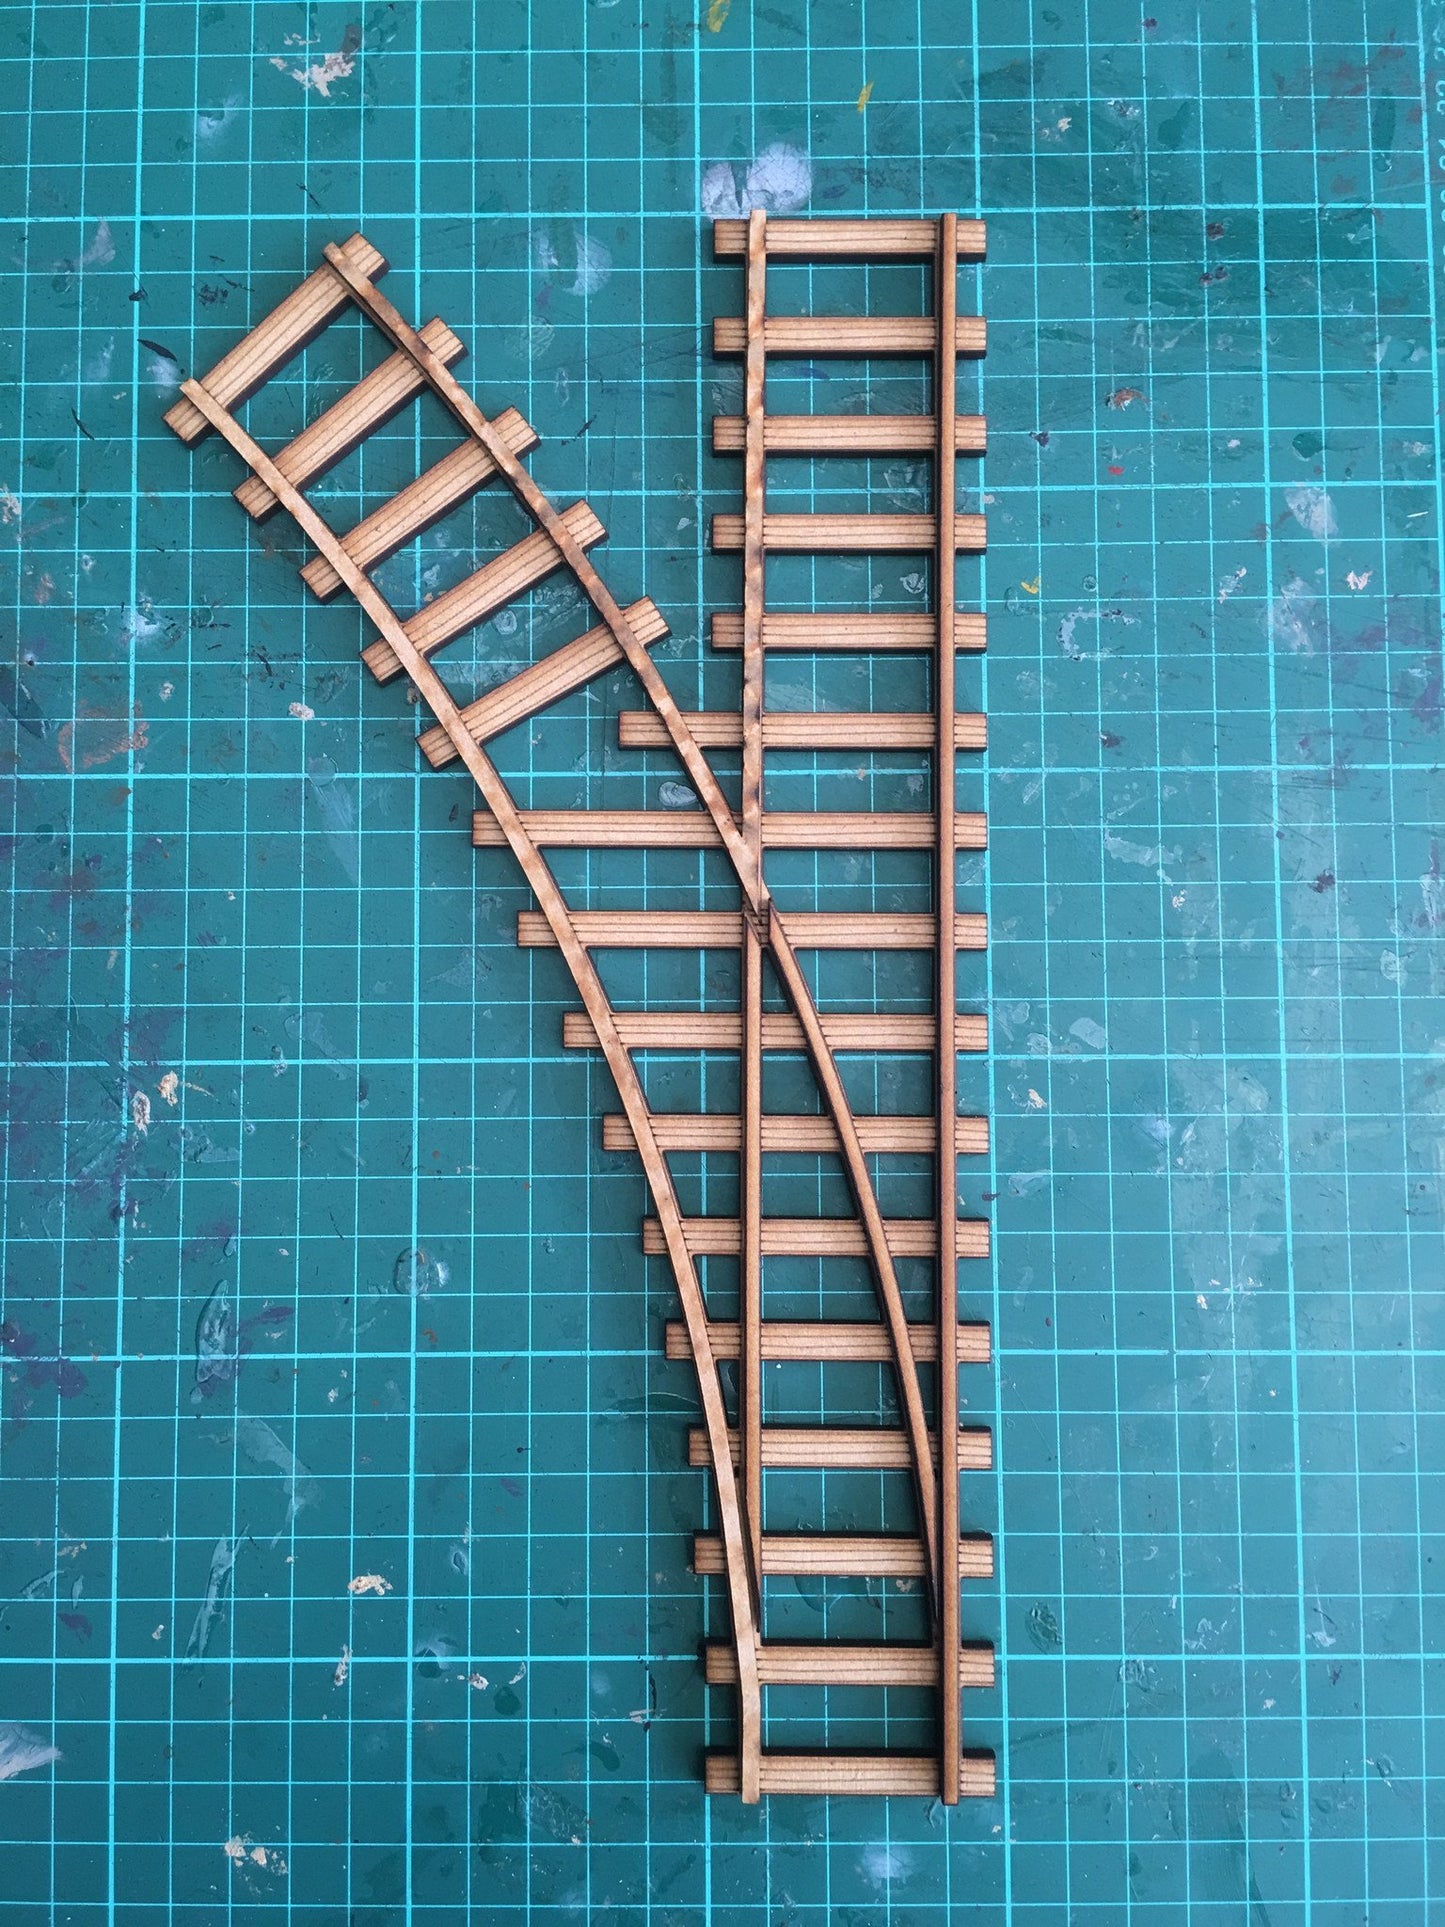 Train track. Points left 45o - Battlefield Accessories